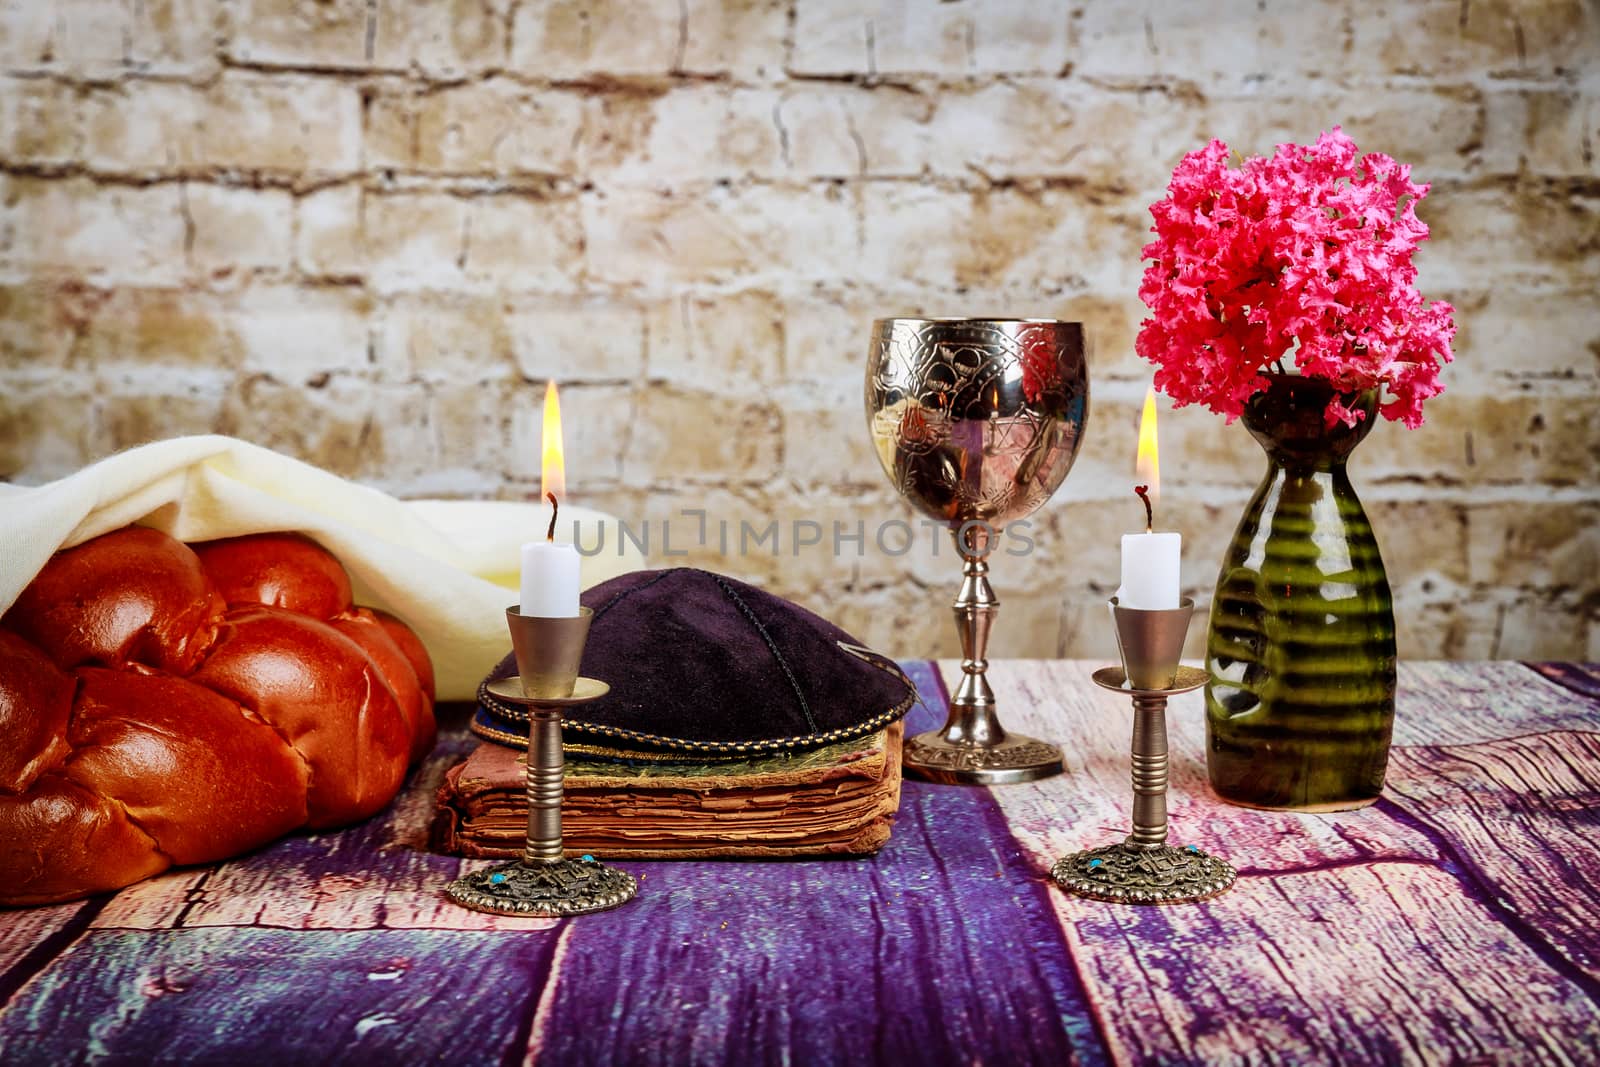 Shabbat candles in candlesticks of loaves challah for Shabbat wine in a cup with flowers